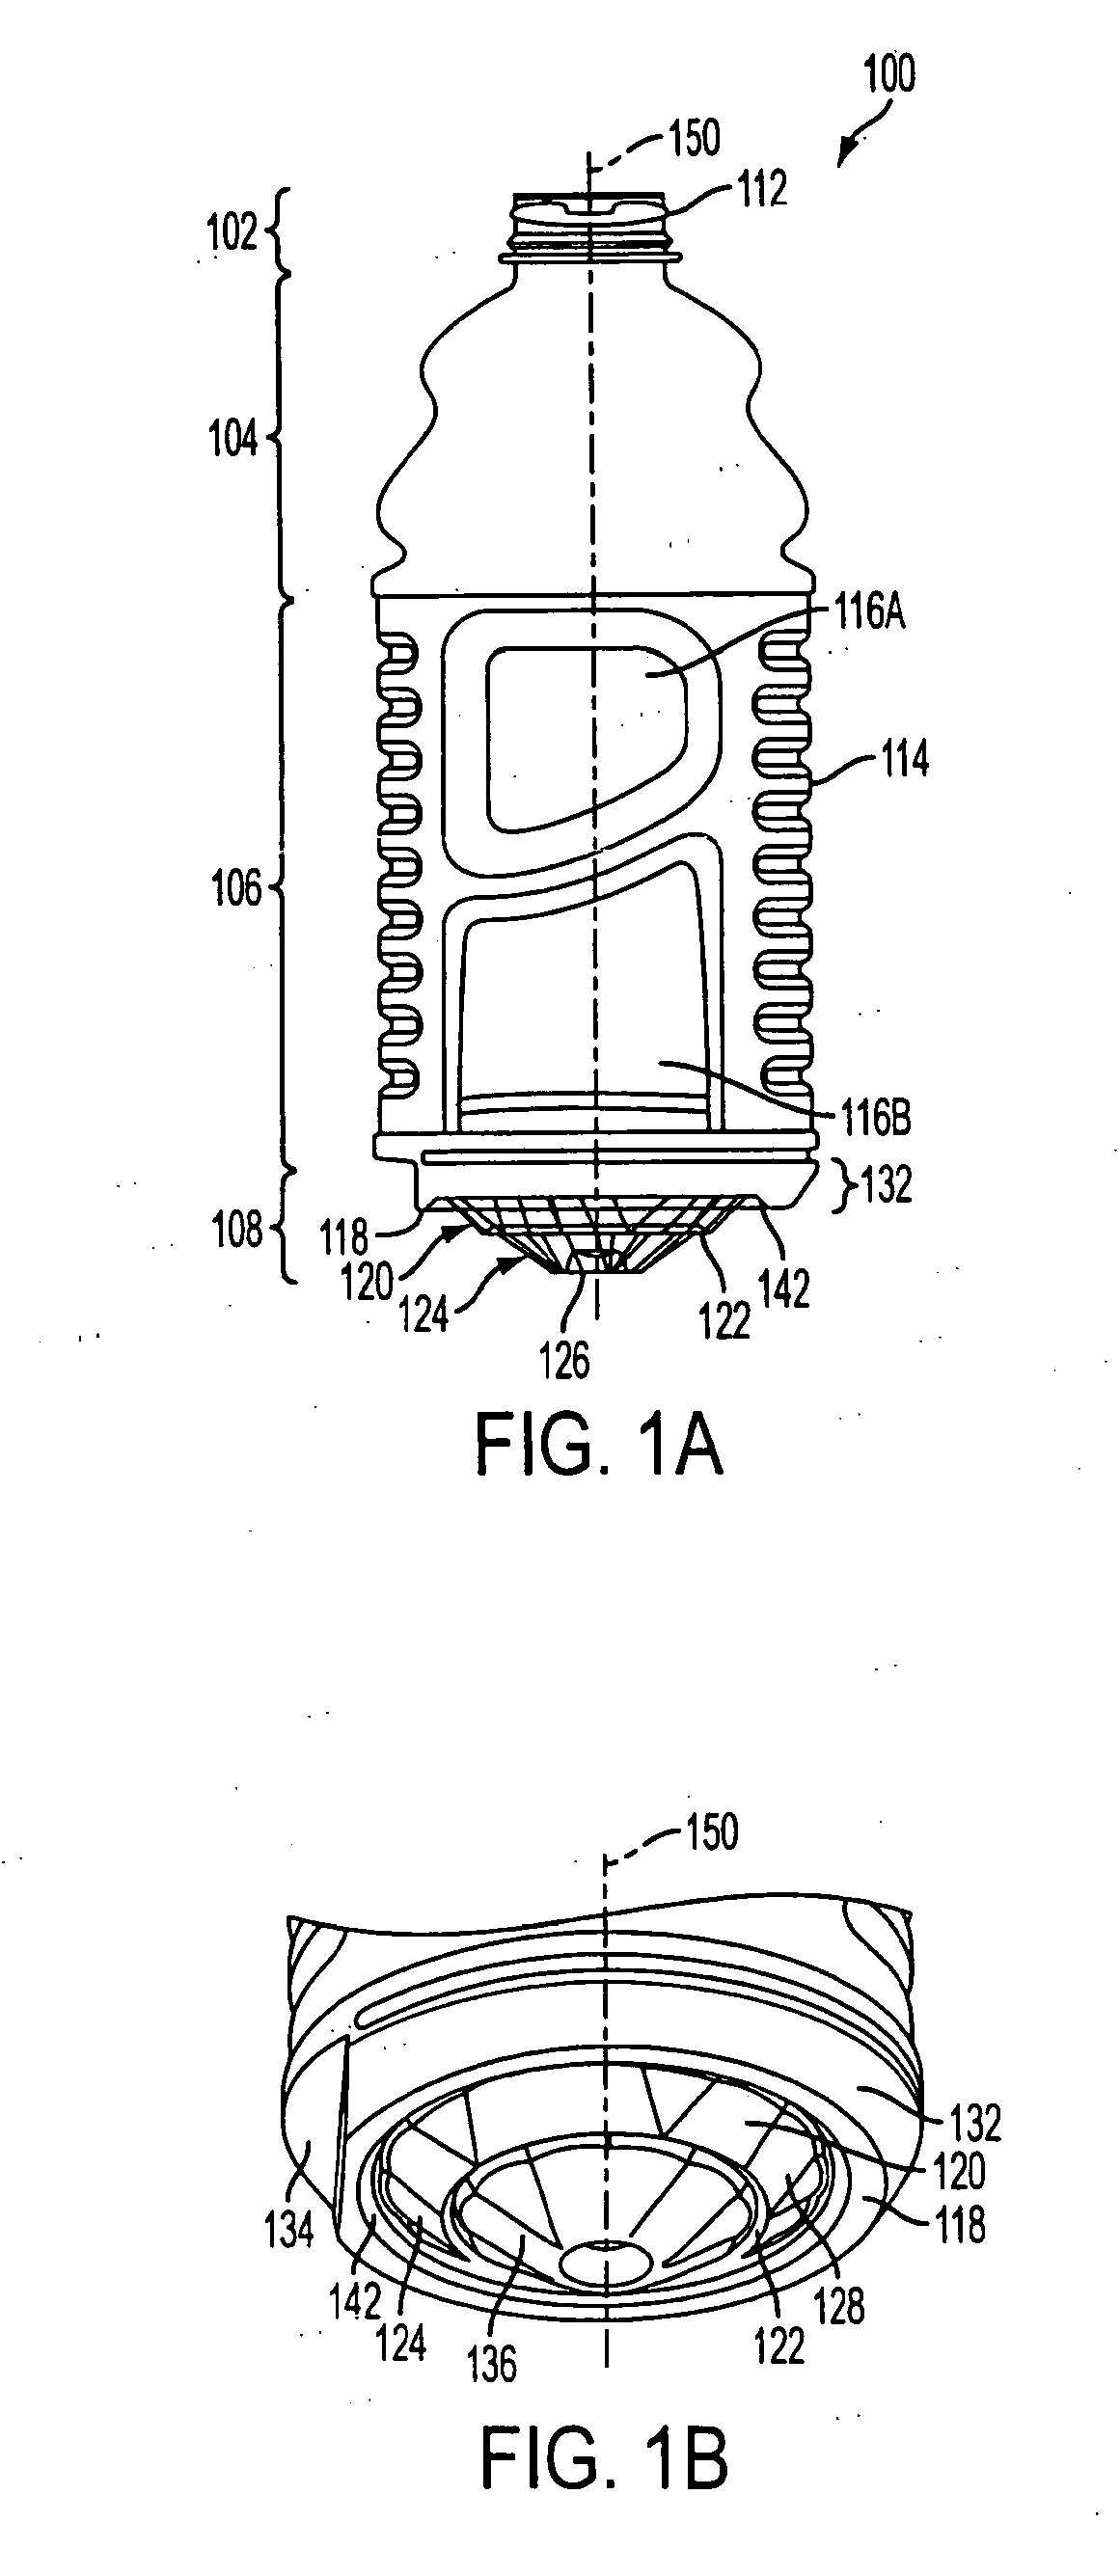 Container and Method for Blowmolding a Base in a Partial Vacuum Pressure Reduction Setup